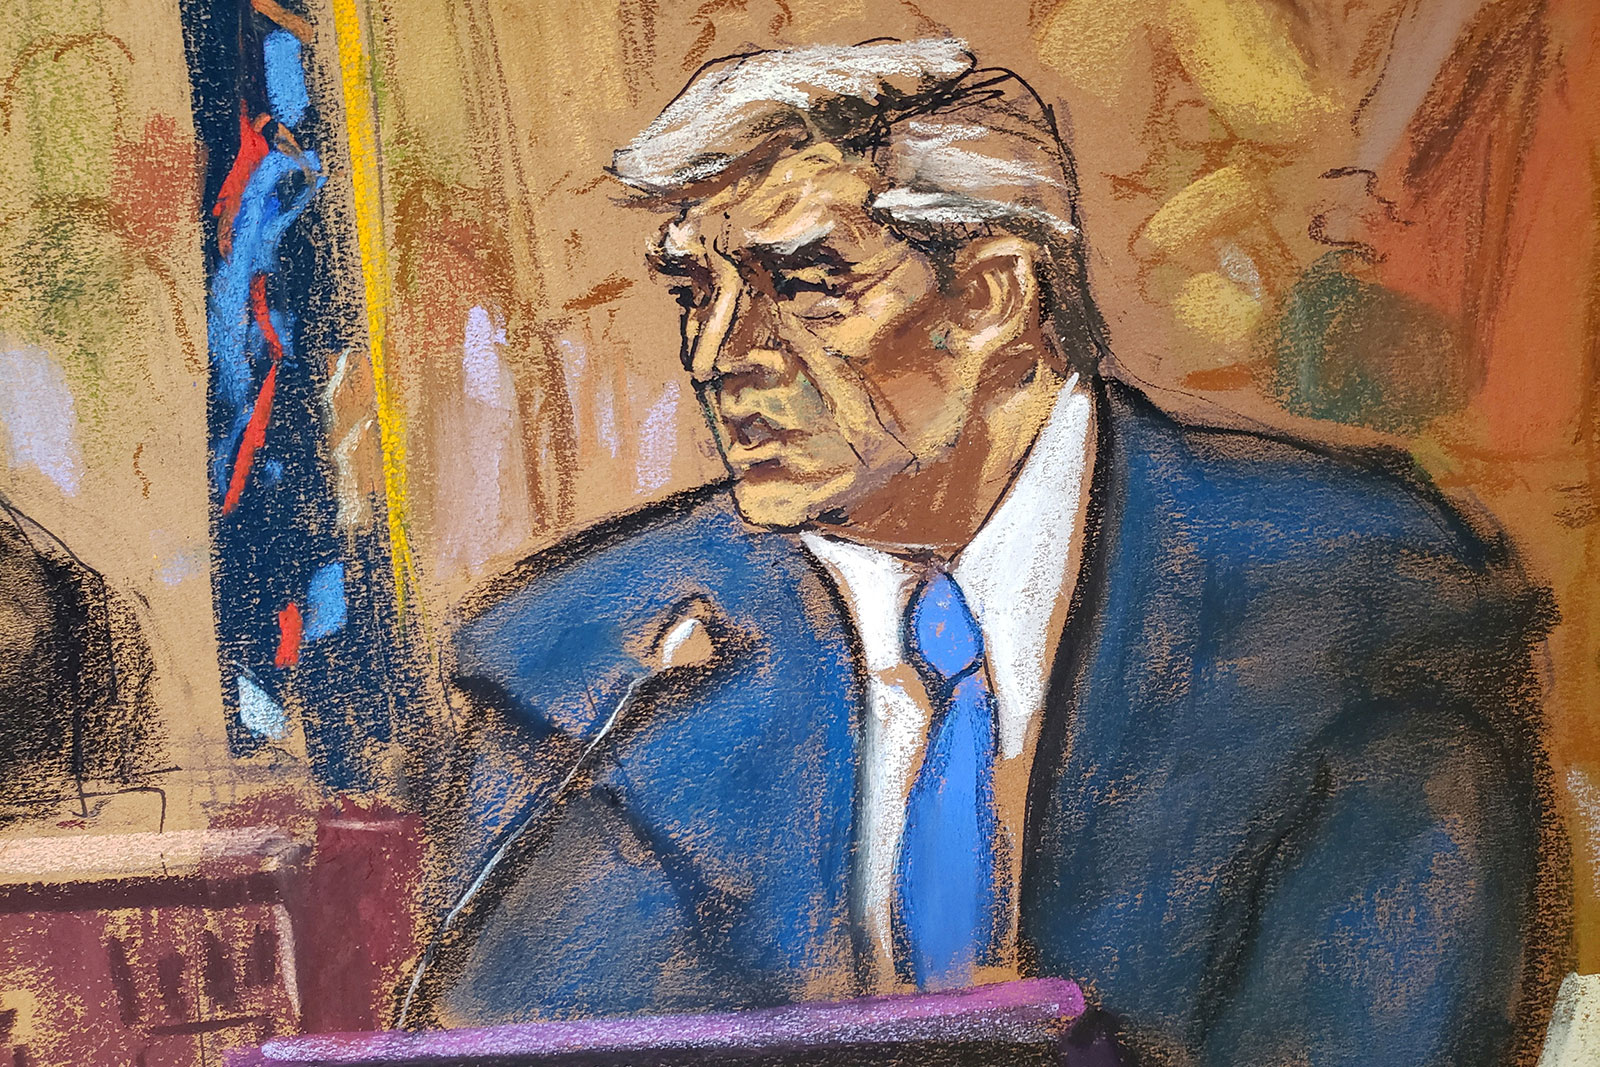 Former President Donald Trump testifies on Wednesday in this courtroom sketch.